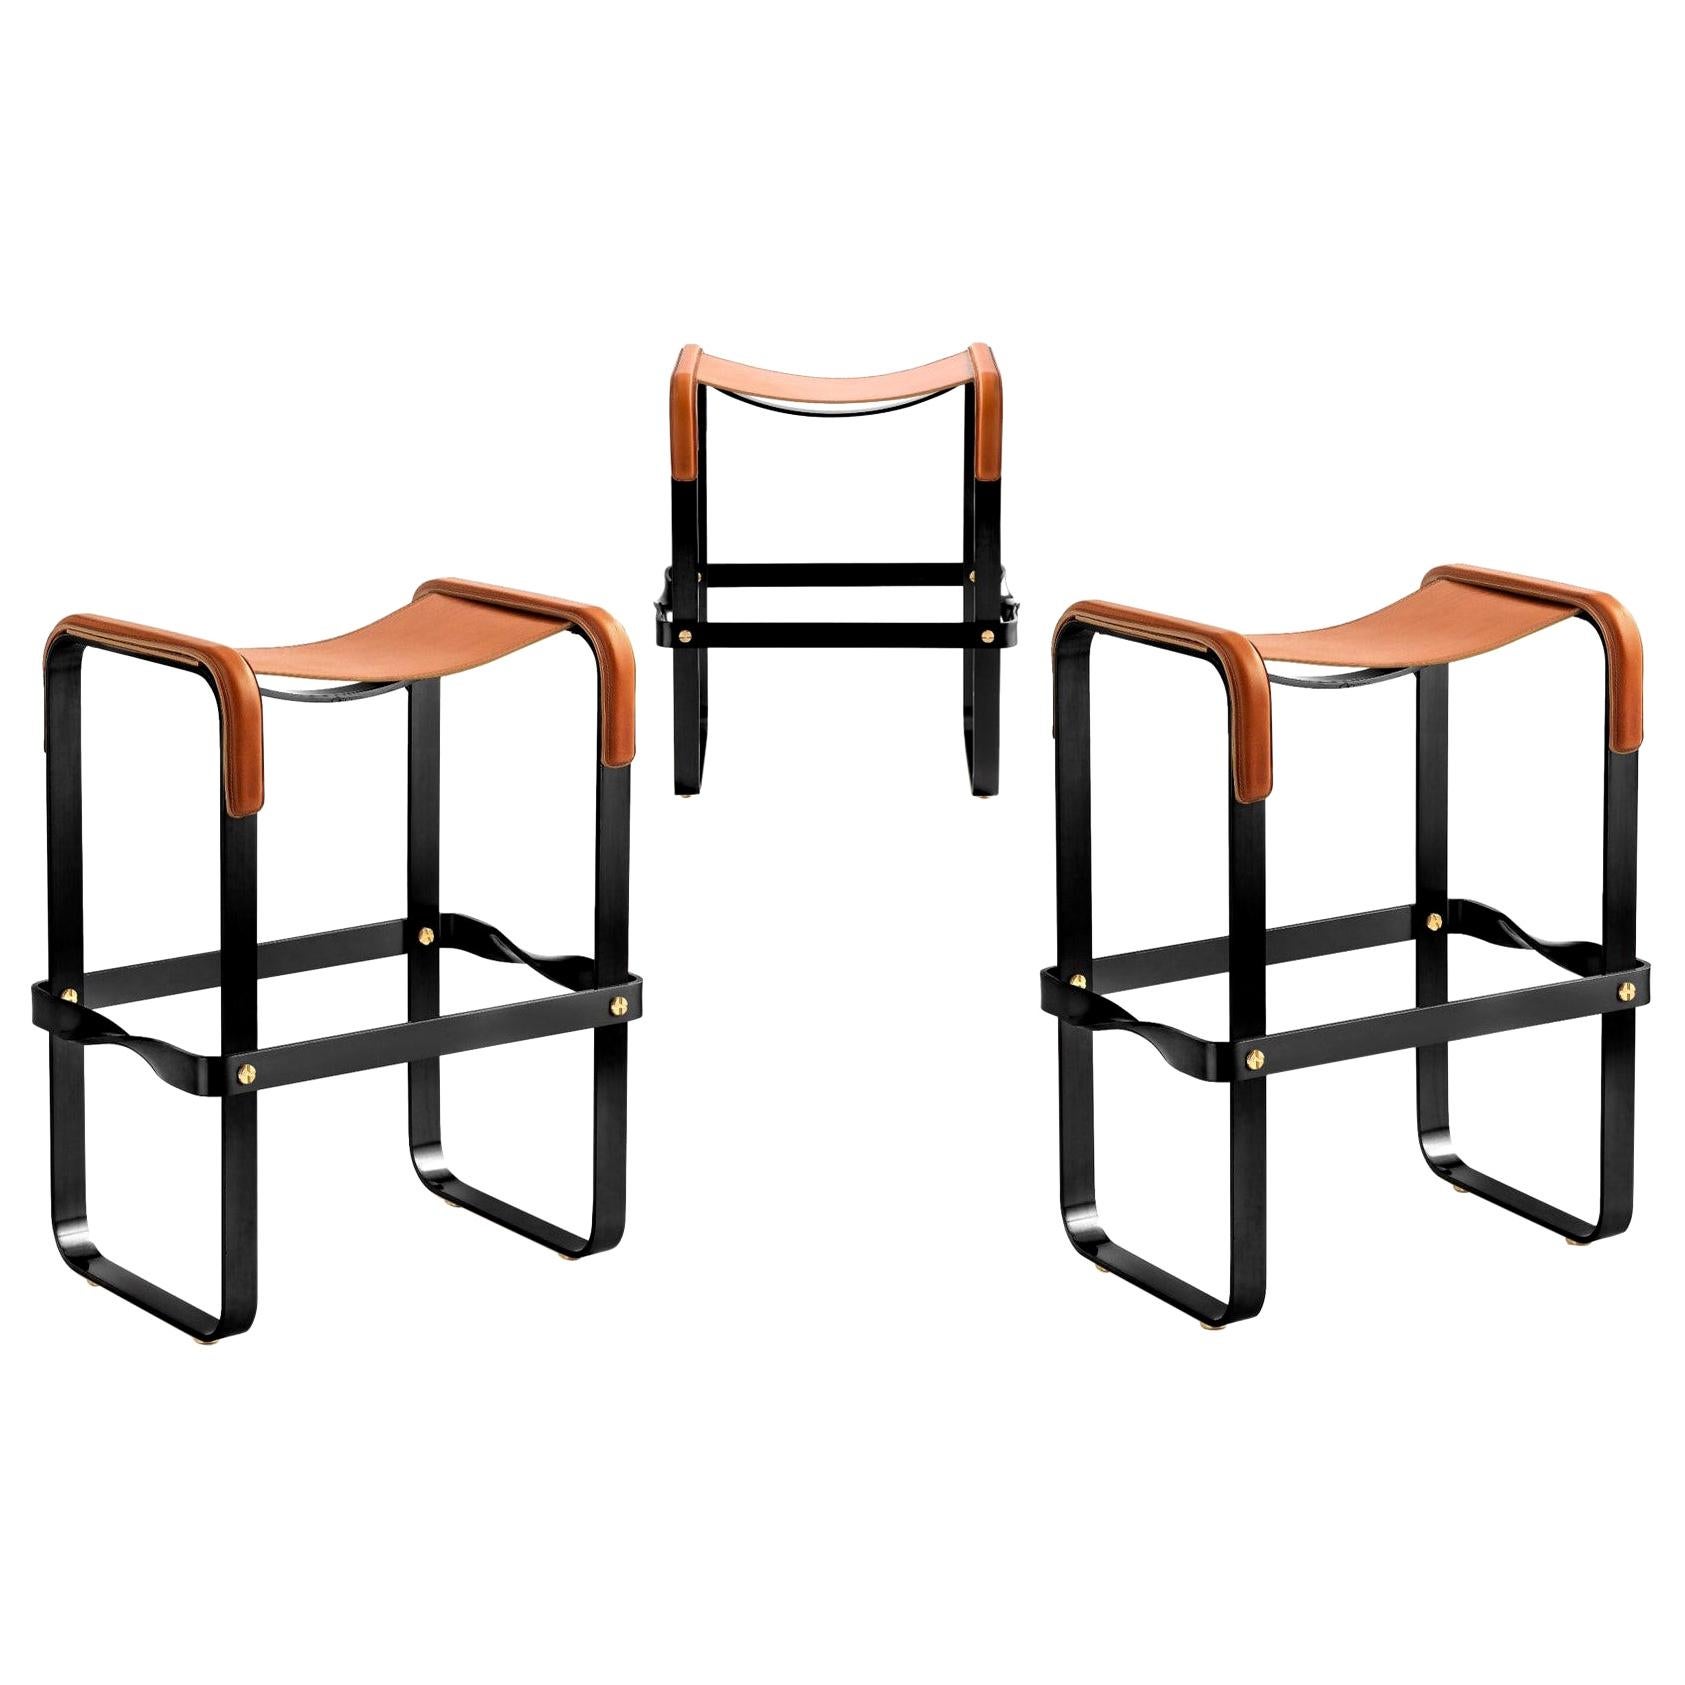 Set of 3 Contemporary Counter Bar Stool Black Metal & Tobacco Leather